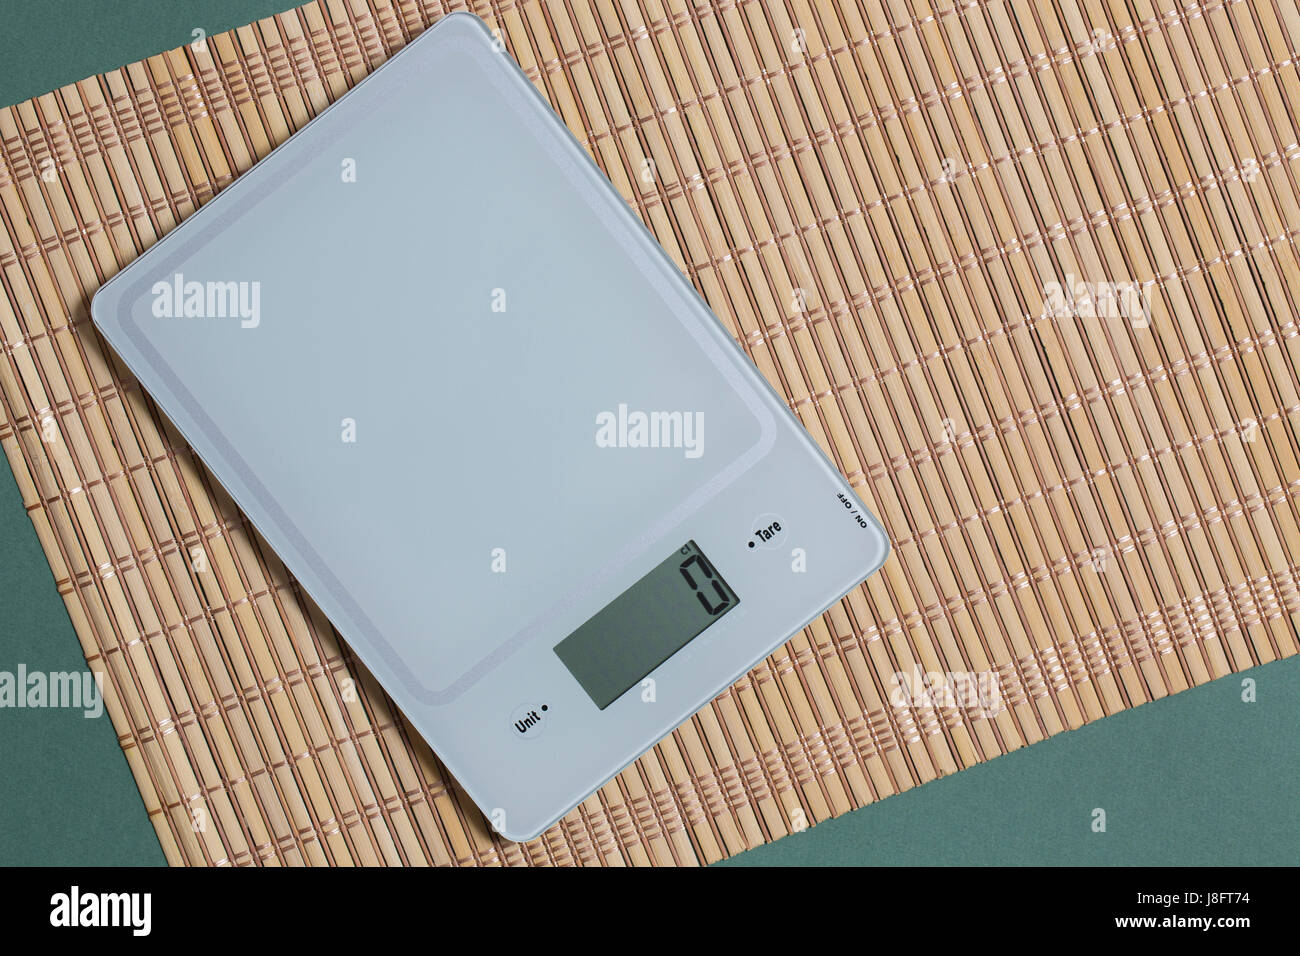 Empty kitchen scale on bamboo mat and green paper background. Stock Photo